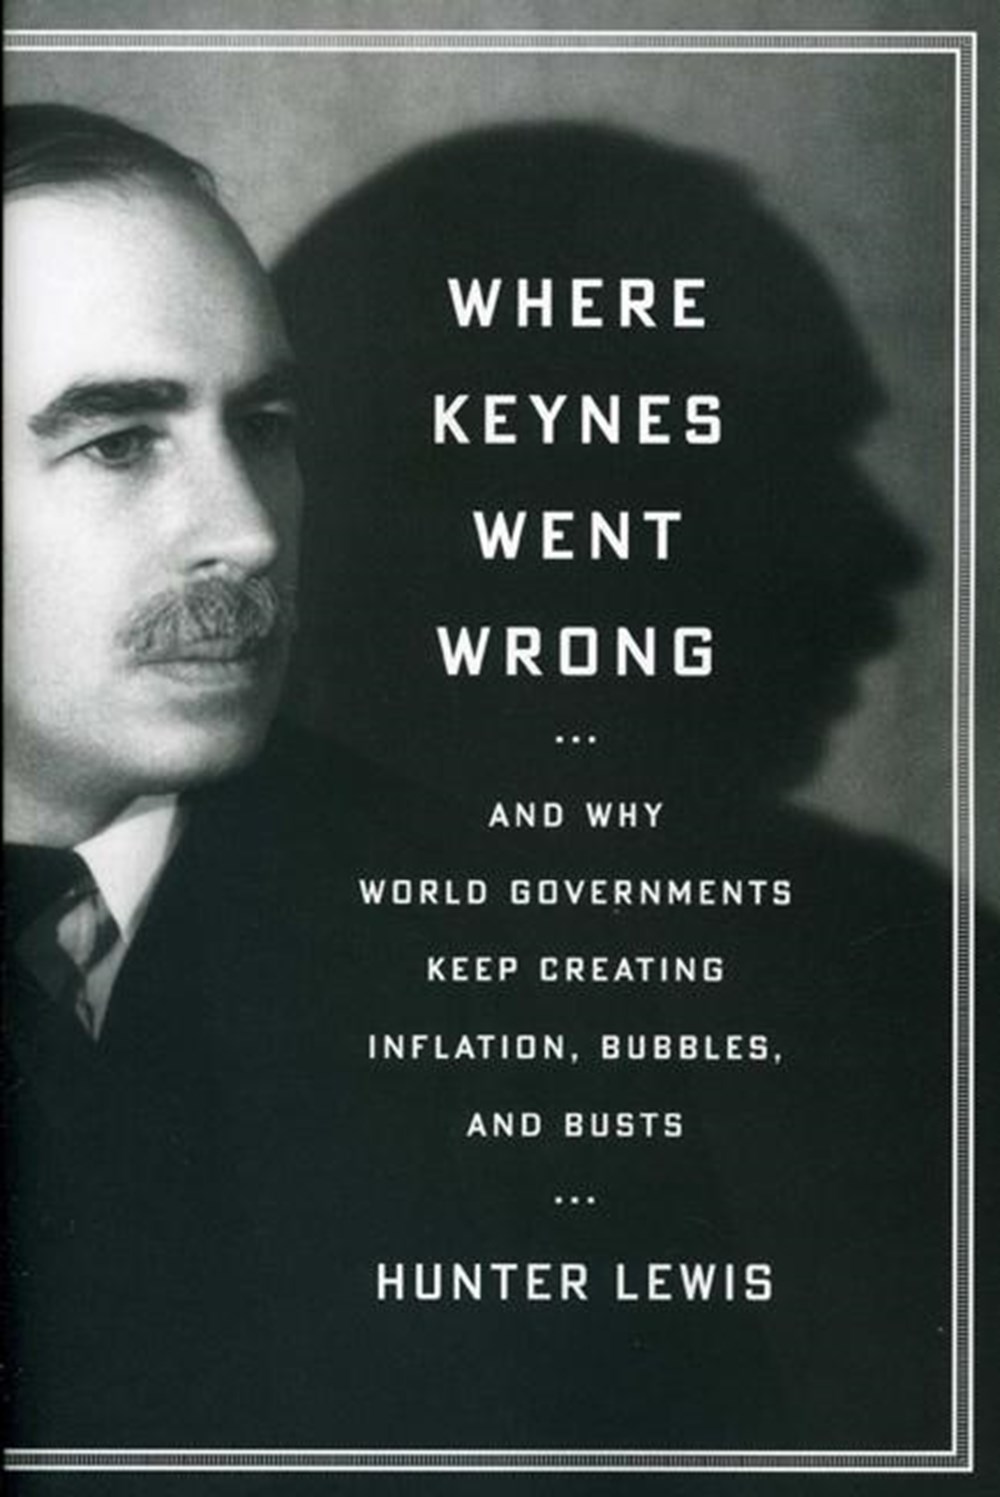 Where Keynes Went Wrong And Why World Governments Keep Creating Inflation, Bubbles, and Busts